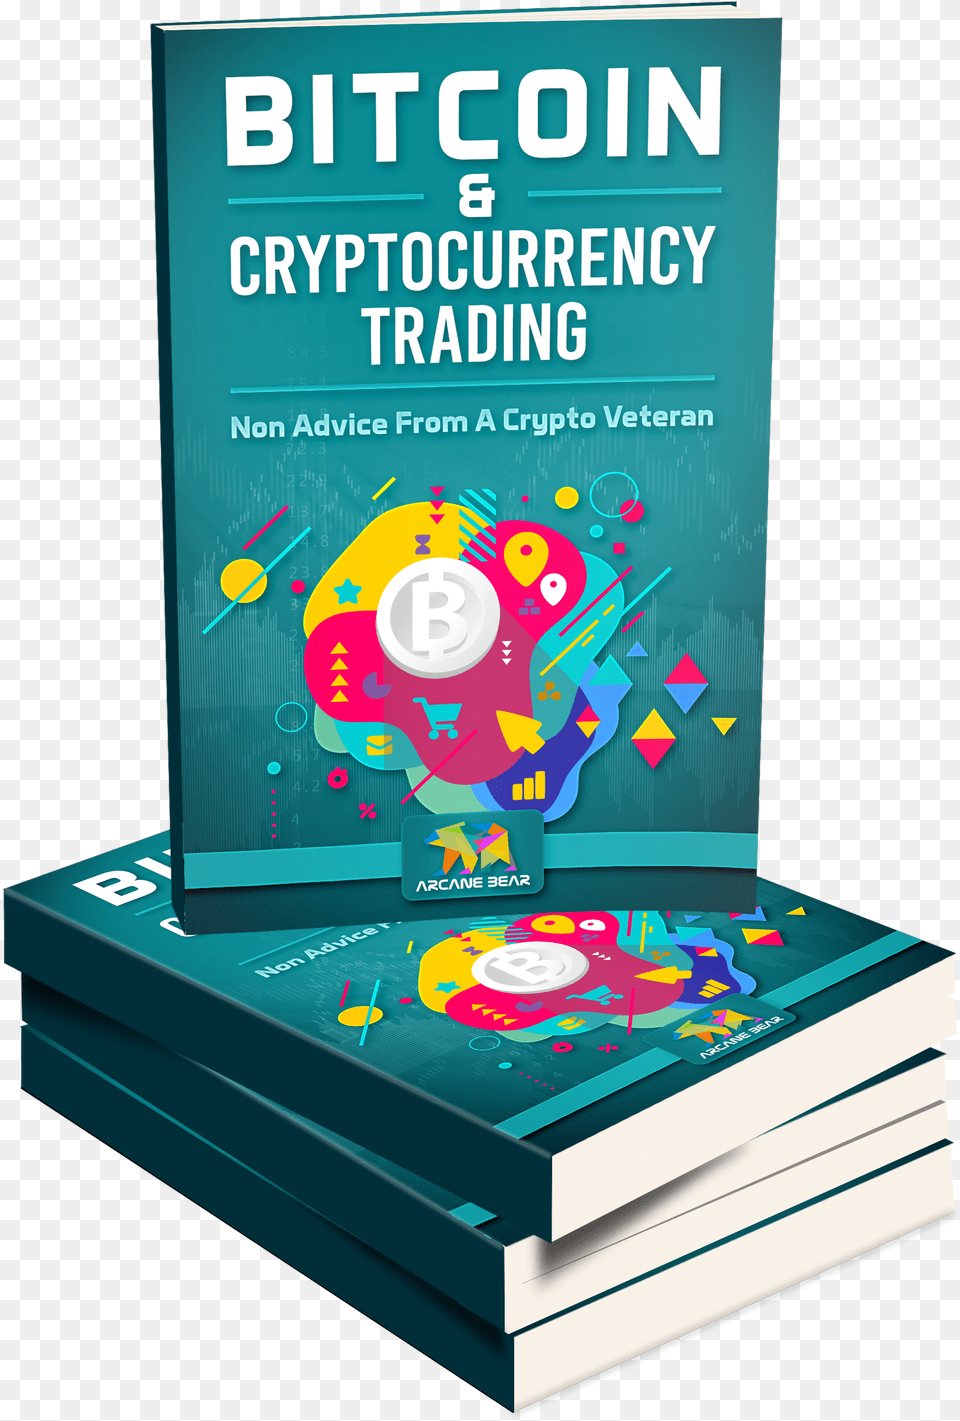 Bitcoin Trading Book, Advertisement, Poster, Publication Png Image